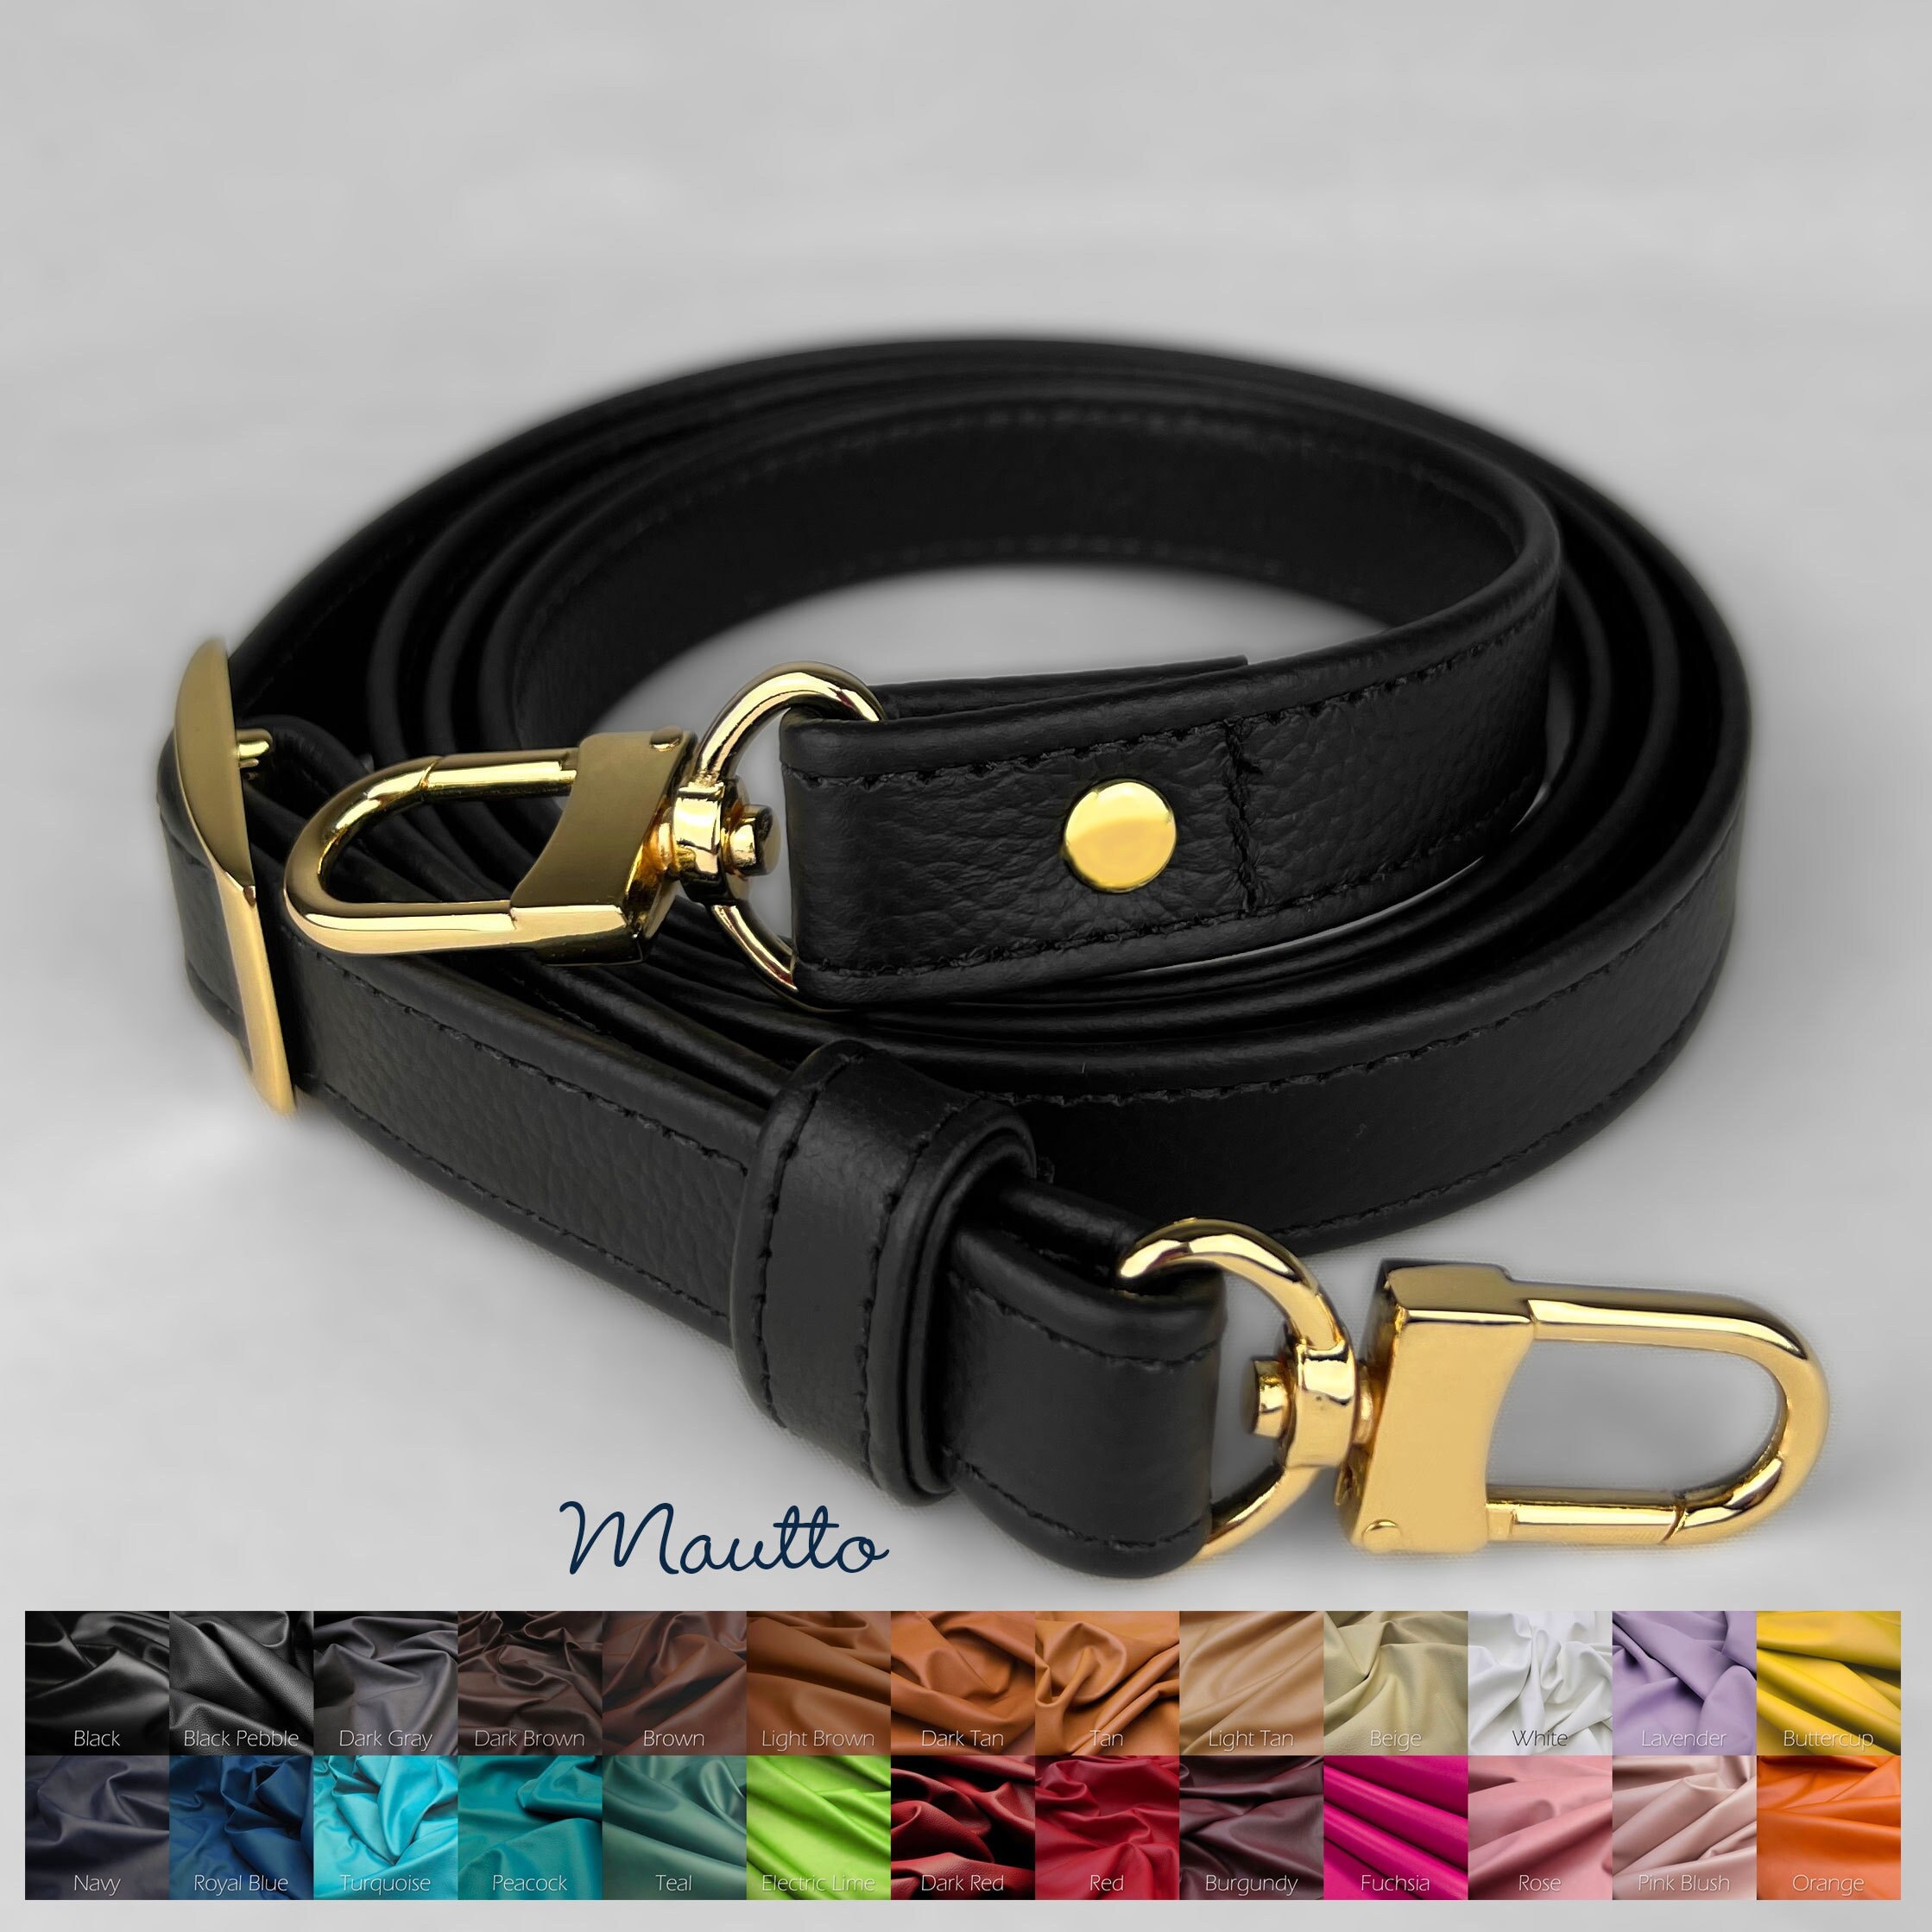 Mautto Adjustable Leather Strap, Shoulder to Crossbody Length - Modern Colors Black Pebble Leather / #16 Gold-Tone